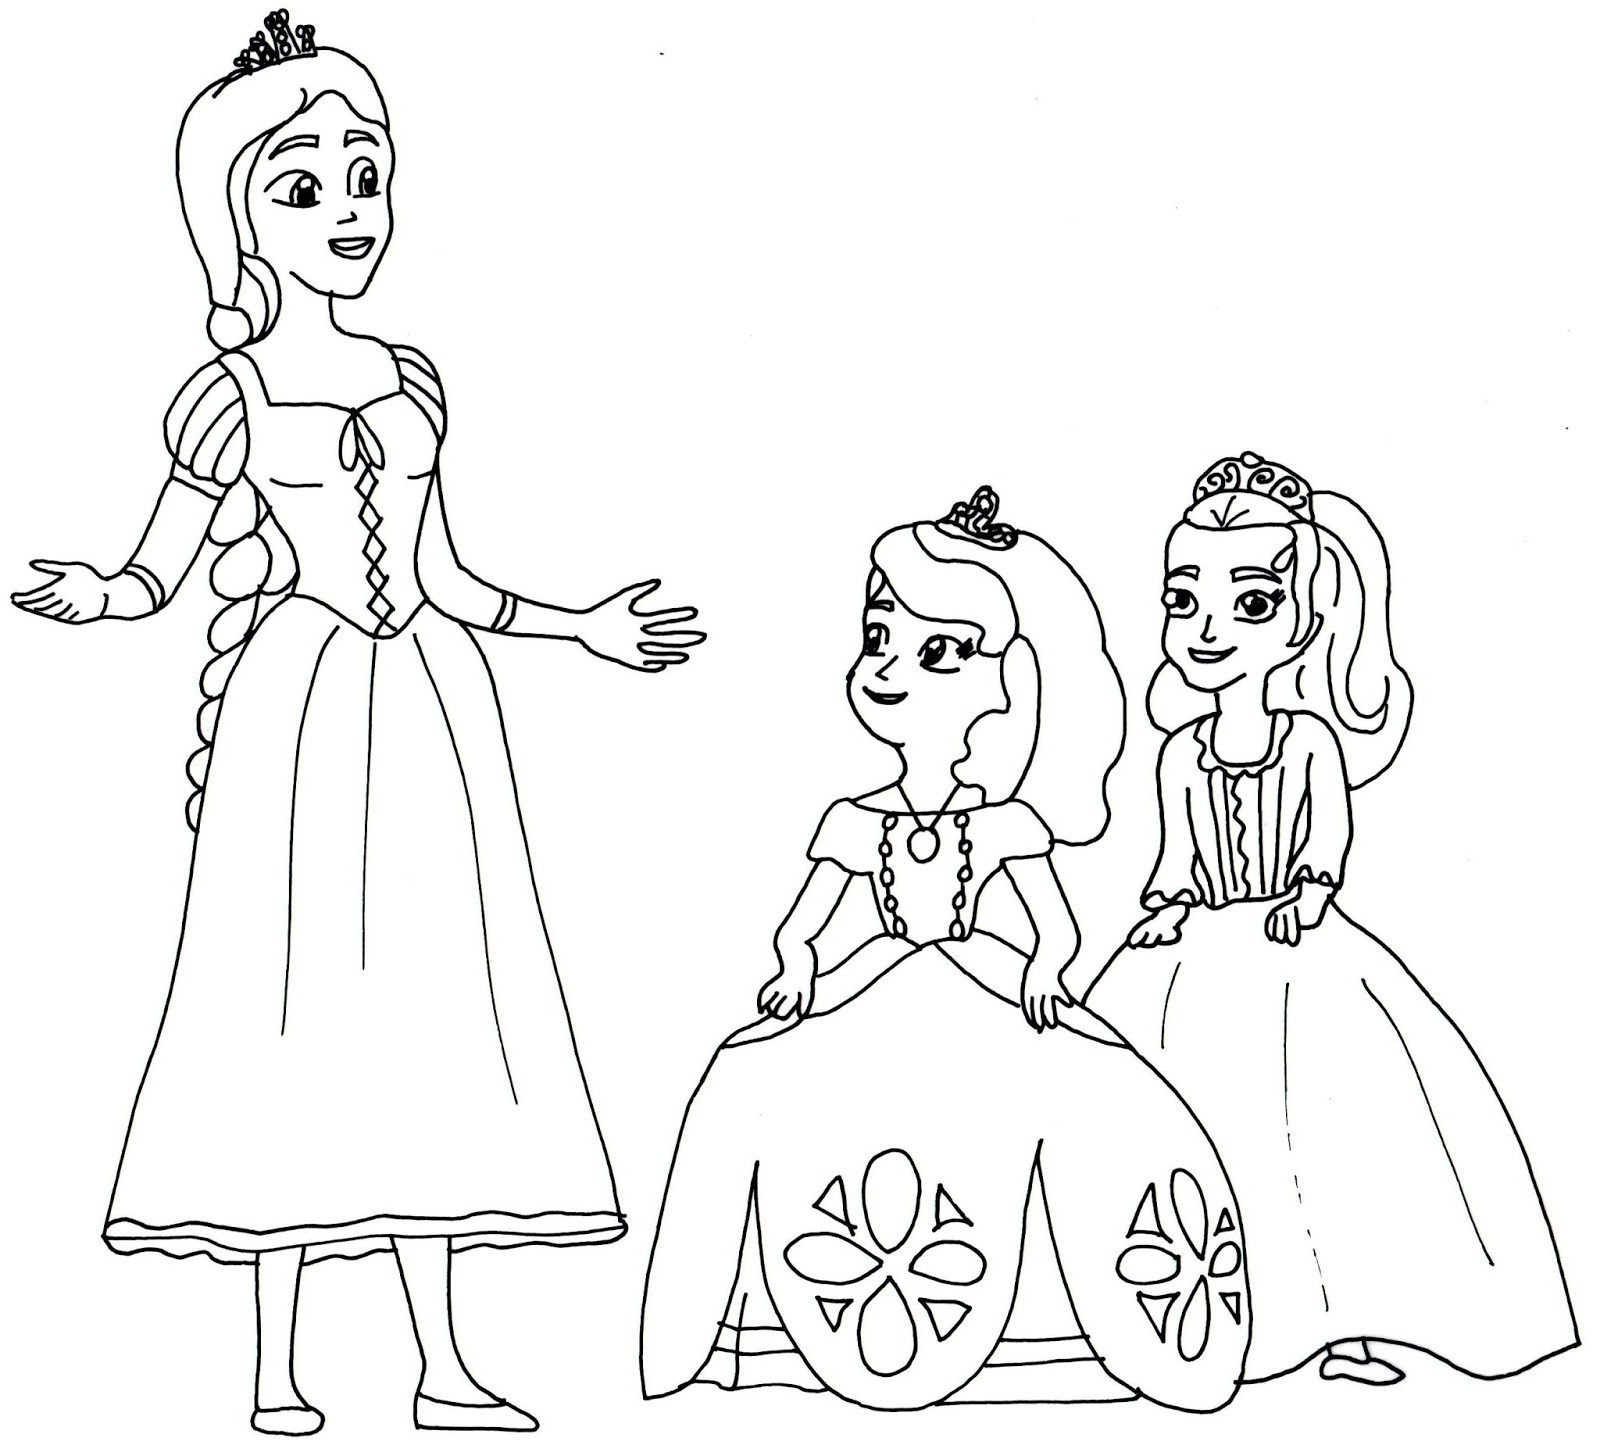 Sofia The First Printable Coloring Pages
 Sofia The First Coloring Pages The Curse of Princess Ivy